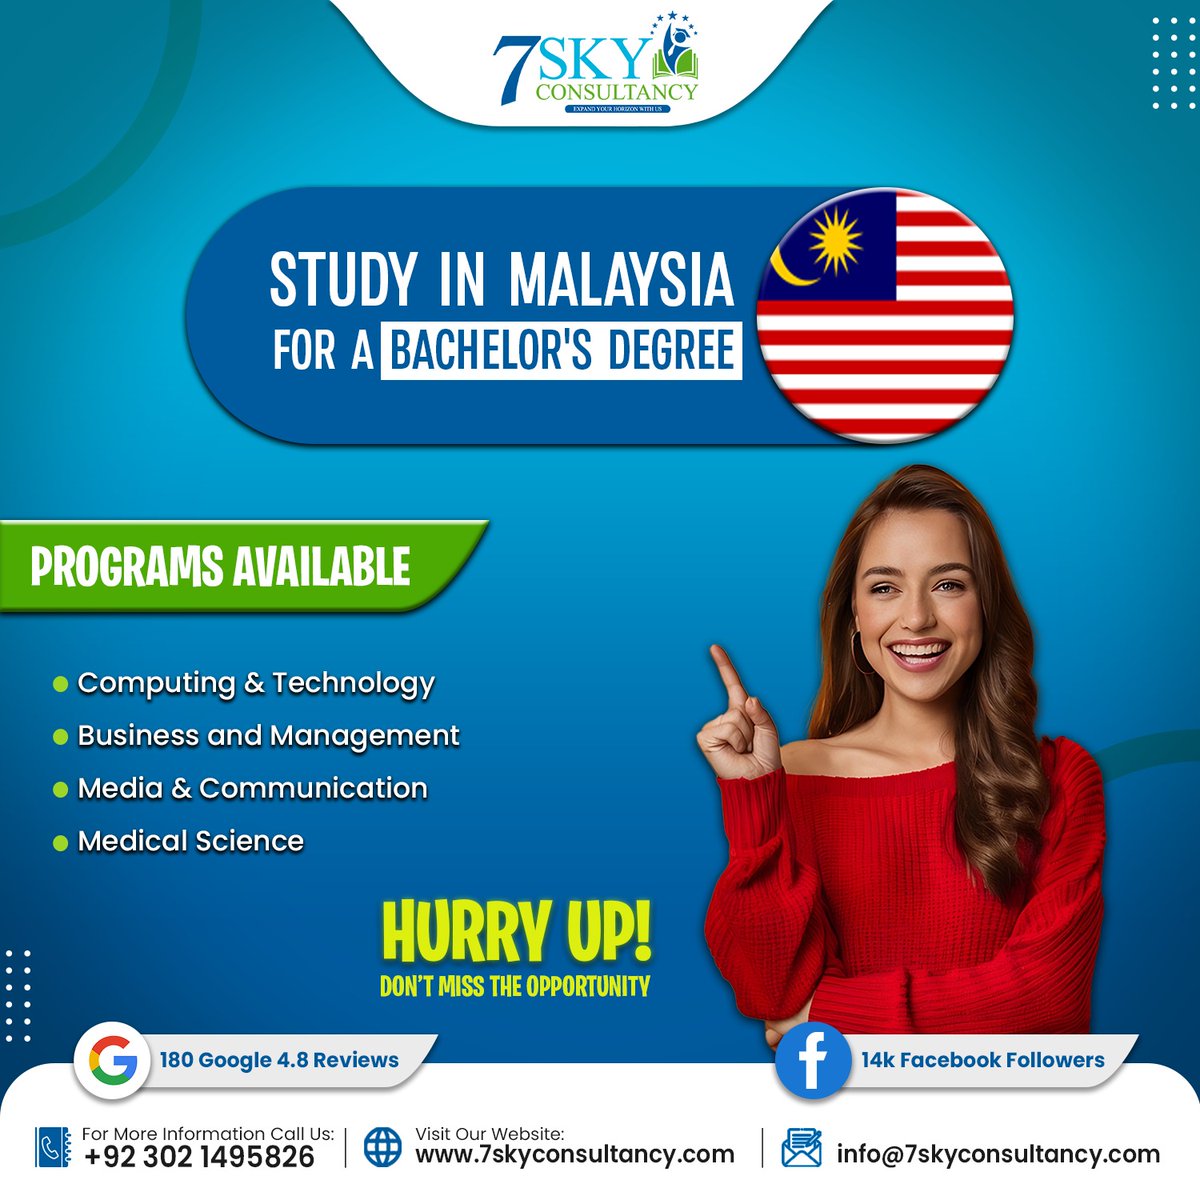 🇲🇾 Malaysia awaits! Get your Bachelor's degree & scholarships! Business, Media, Tech & More! Link: 7skyconsultancy.com/apply-now.php #studyinMalaysia #studyabroad #bachelorcourses #7skyconsultancy pen_spark